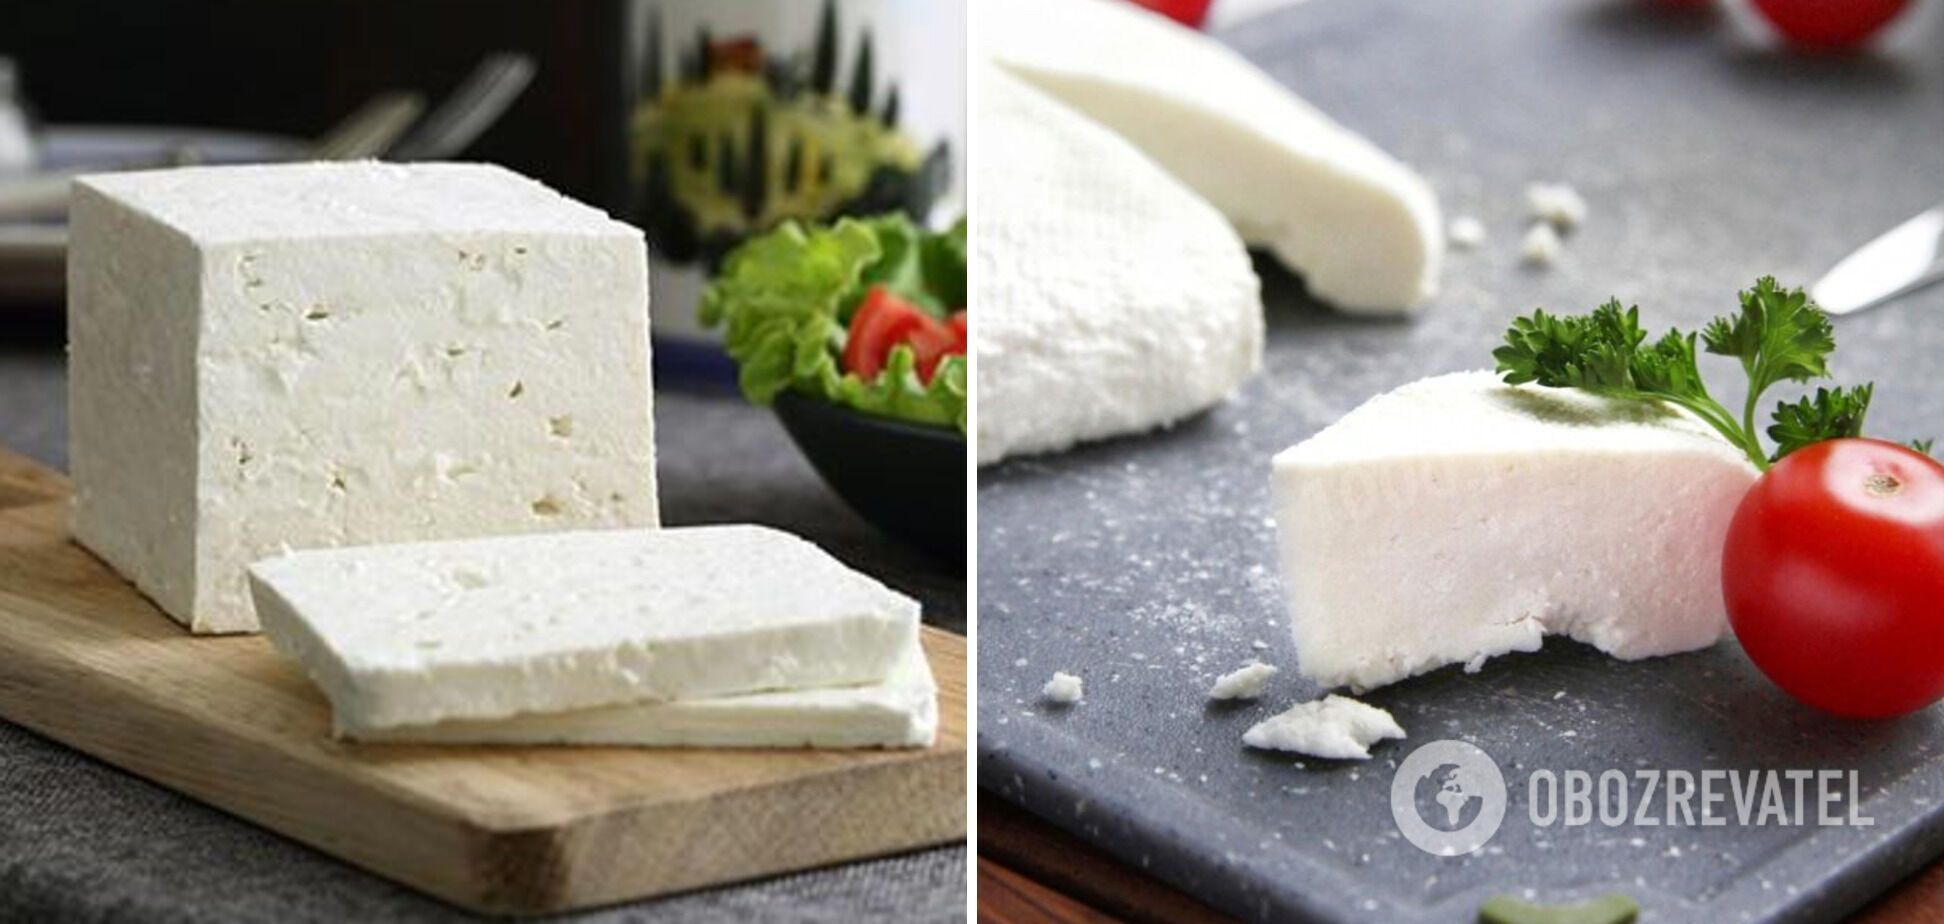 ''It's spoiled, take it back!'' Why craft cheeses often have an unpleasant odor: experts answer